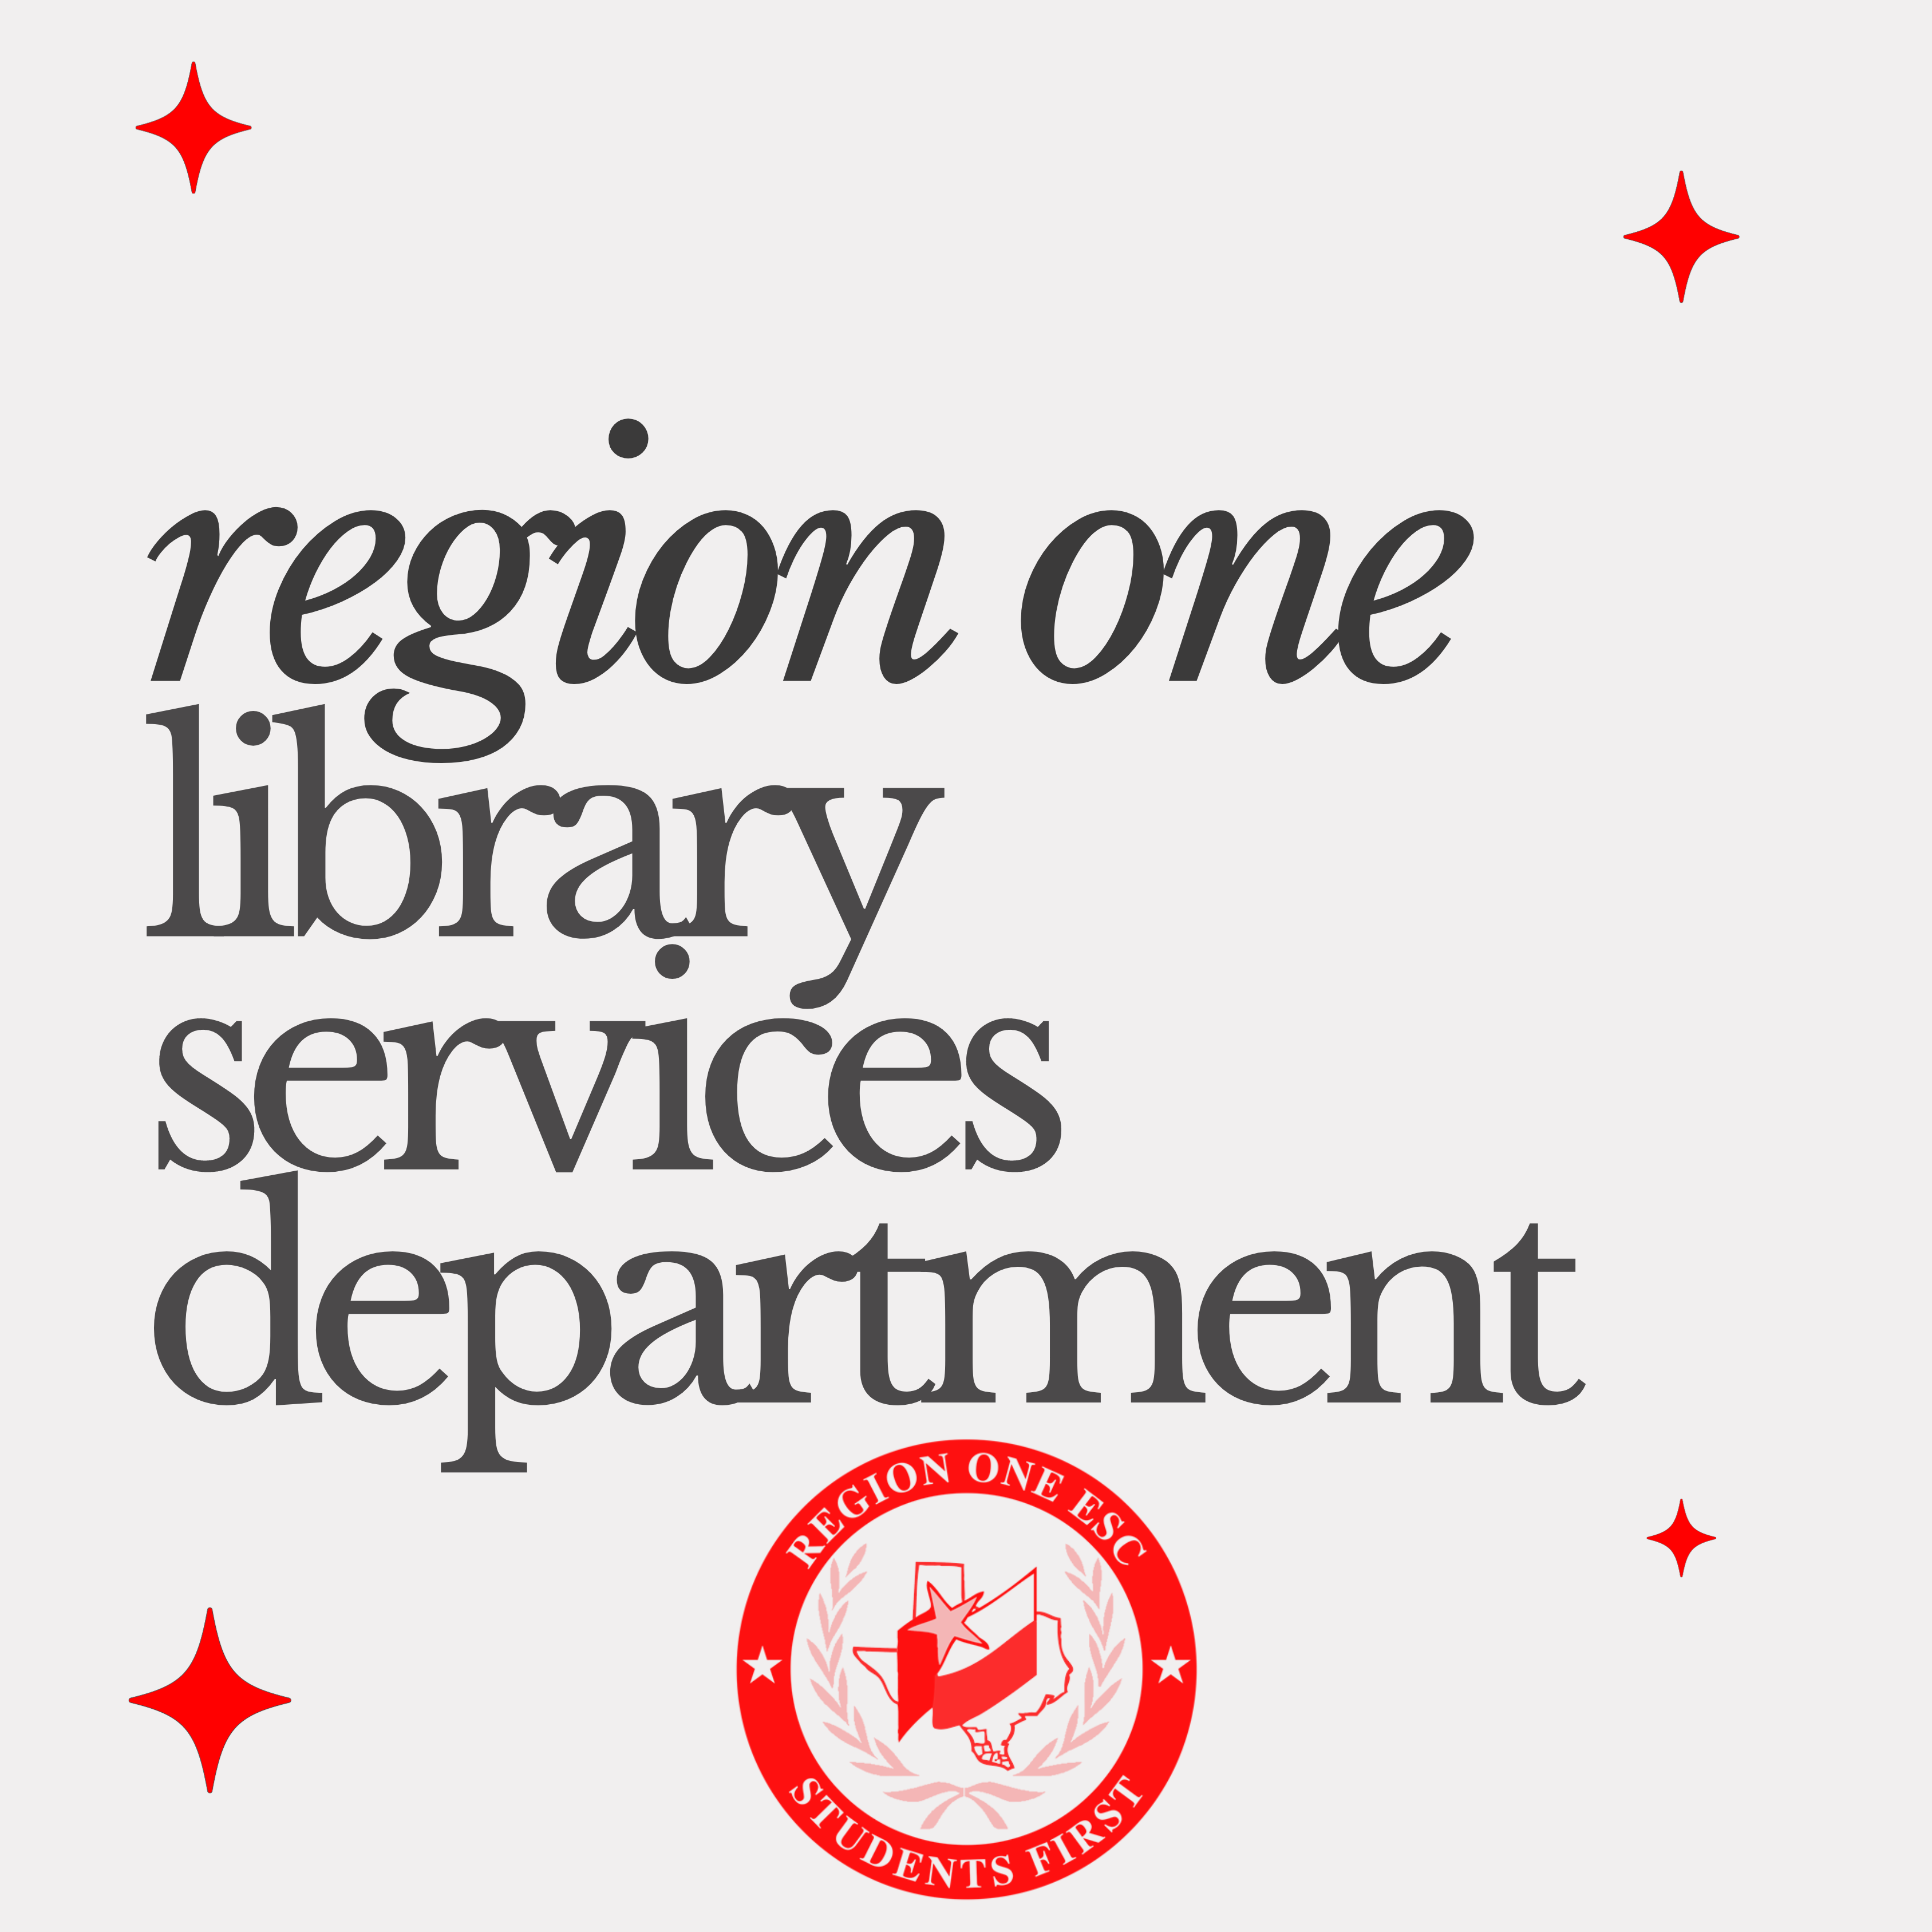 Region One Library Services